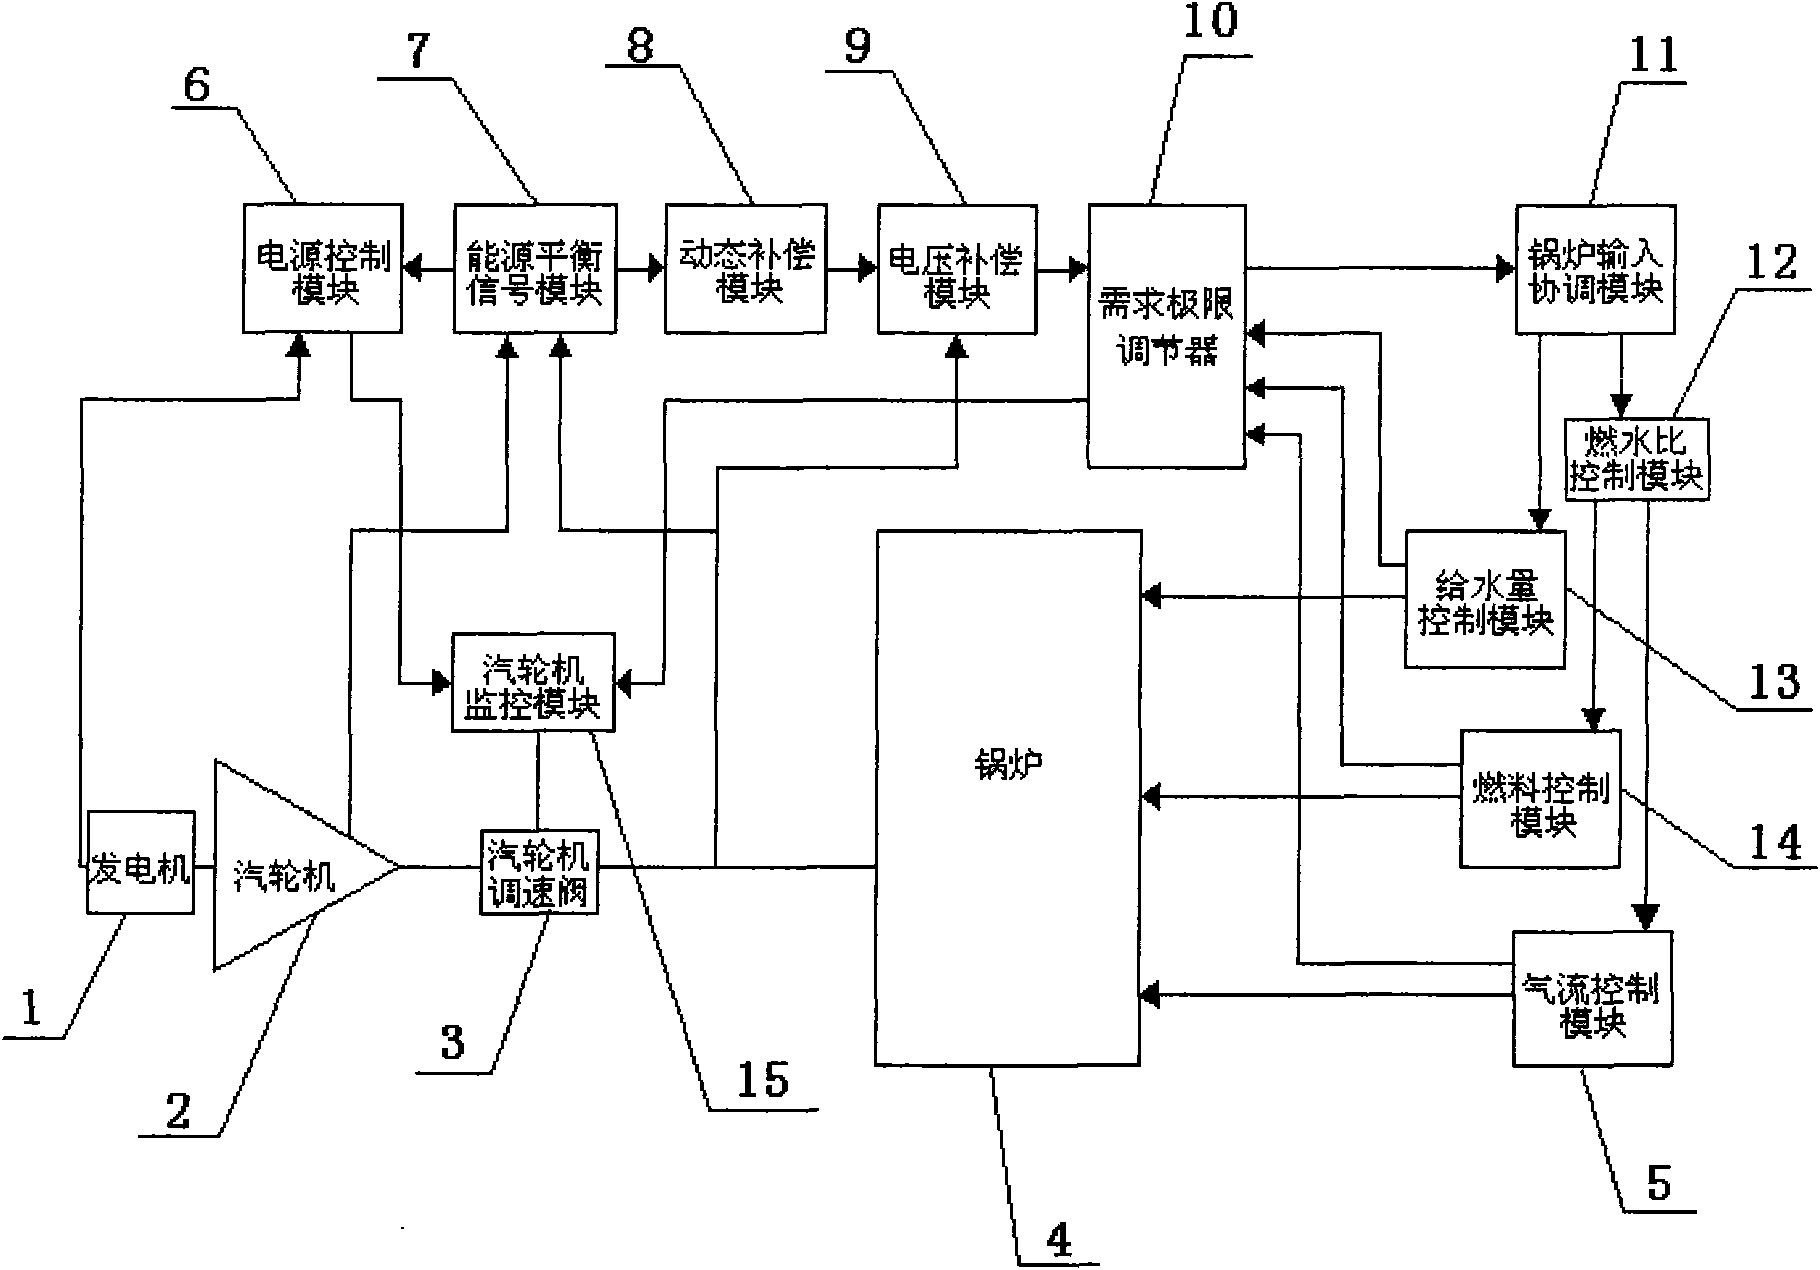 Direct energy balance and coordination control system for supercritical thermal power generating unit